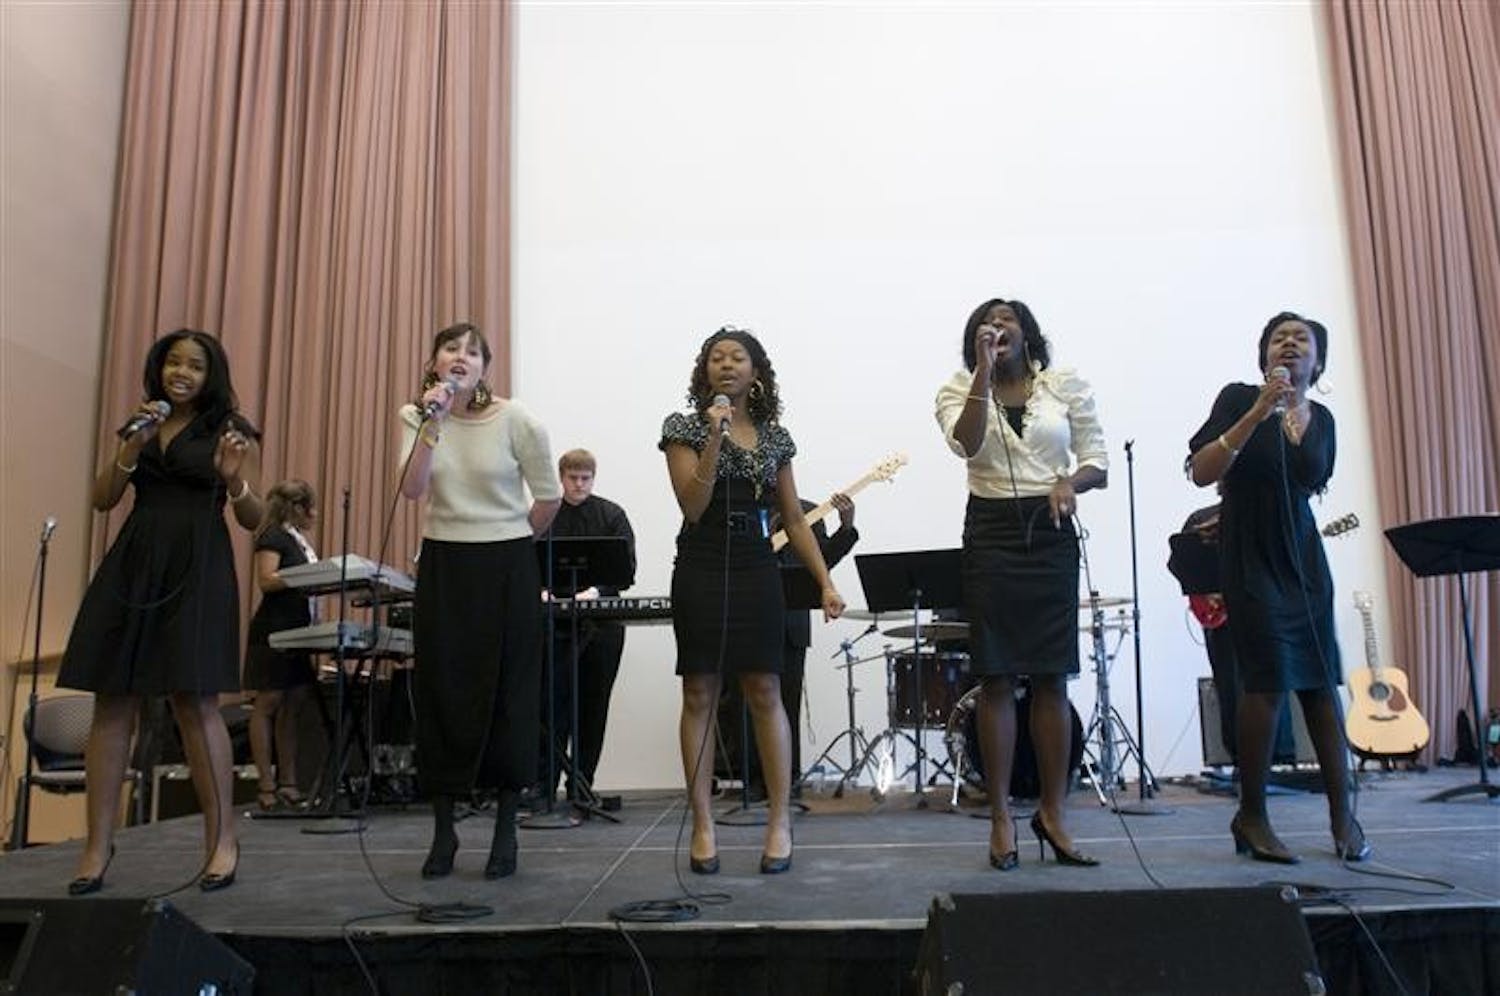  IU's African American Arts Institute presents three contemporary gospel groups  who performed Sunday evening in the Grand Hall of the Neal-Marshall Black Culture Center. The all-female group, Sojourner, preserves the vocal traditions of black gospel music, as part of the African American Choral Ensemble. 